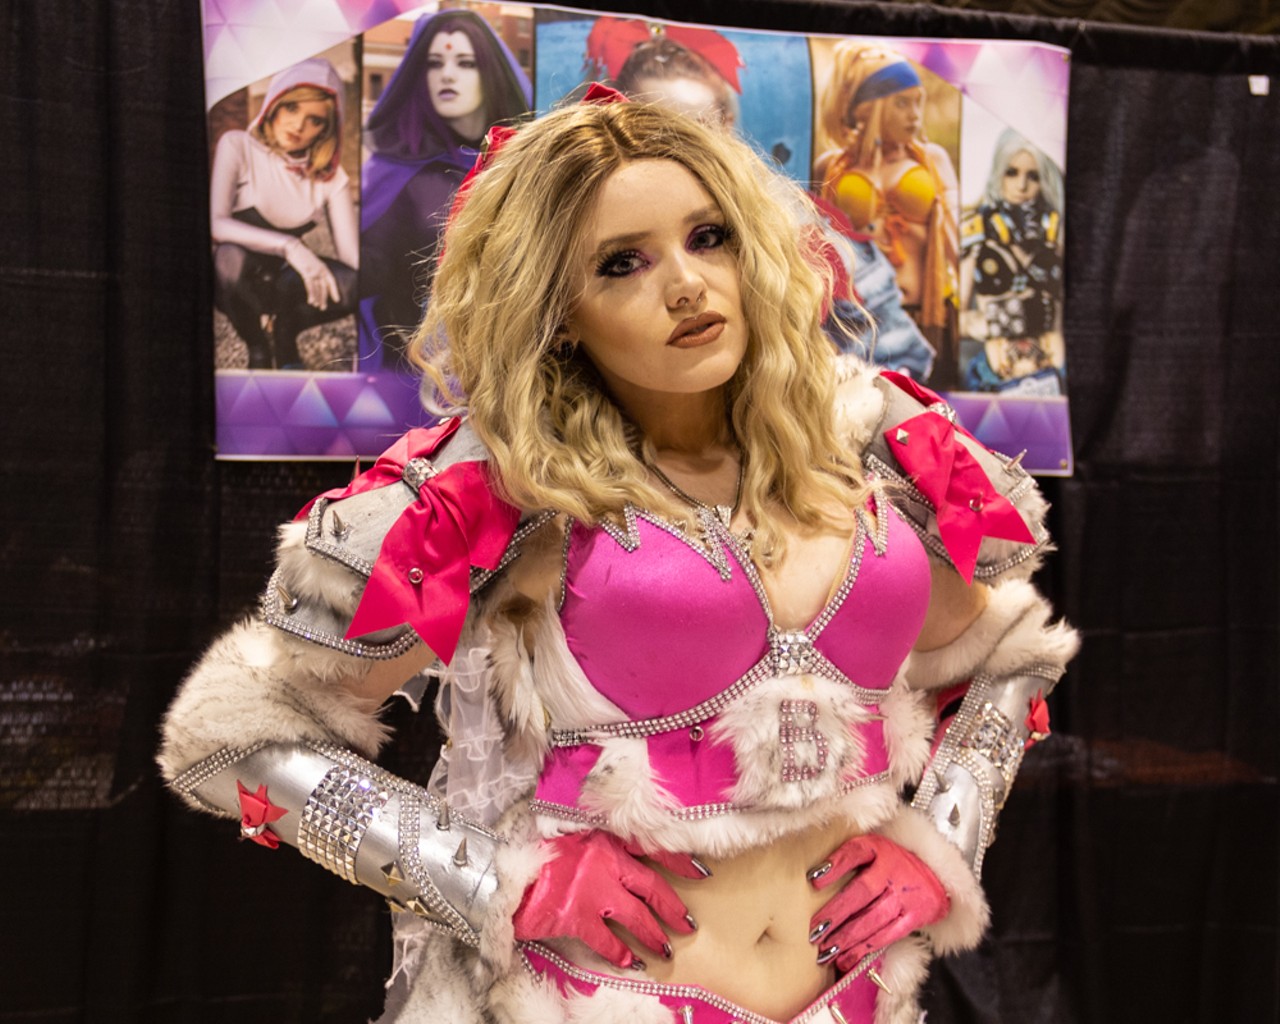 Wizard World's St. Louis Comic Con 2019 Was a Cosplay Paradise